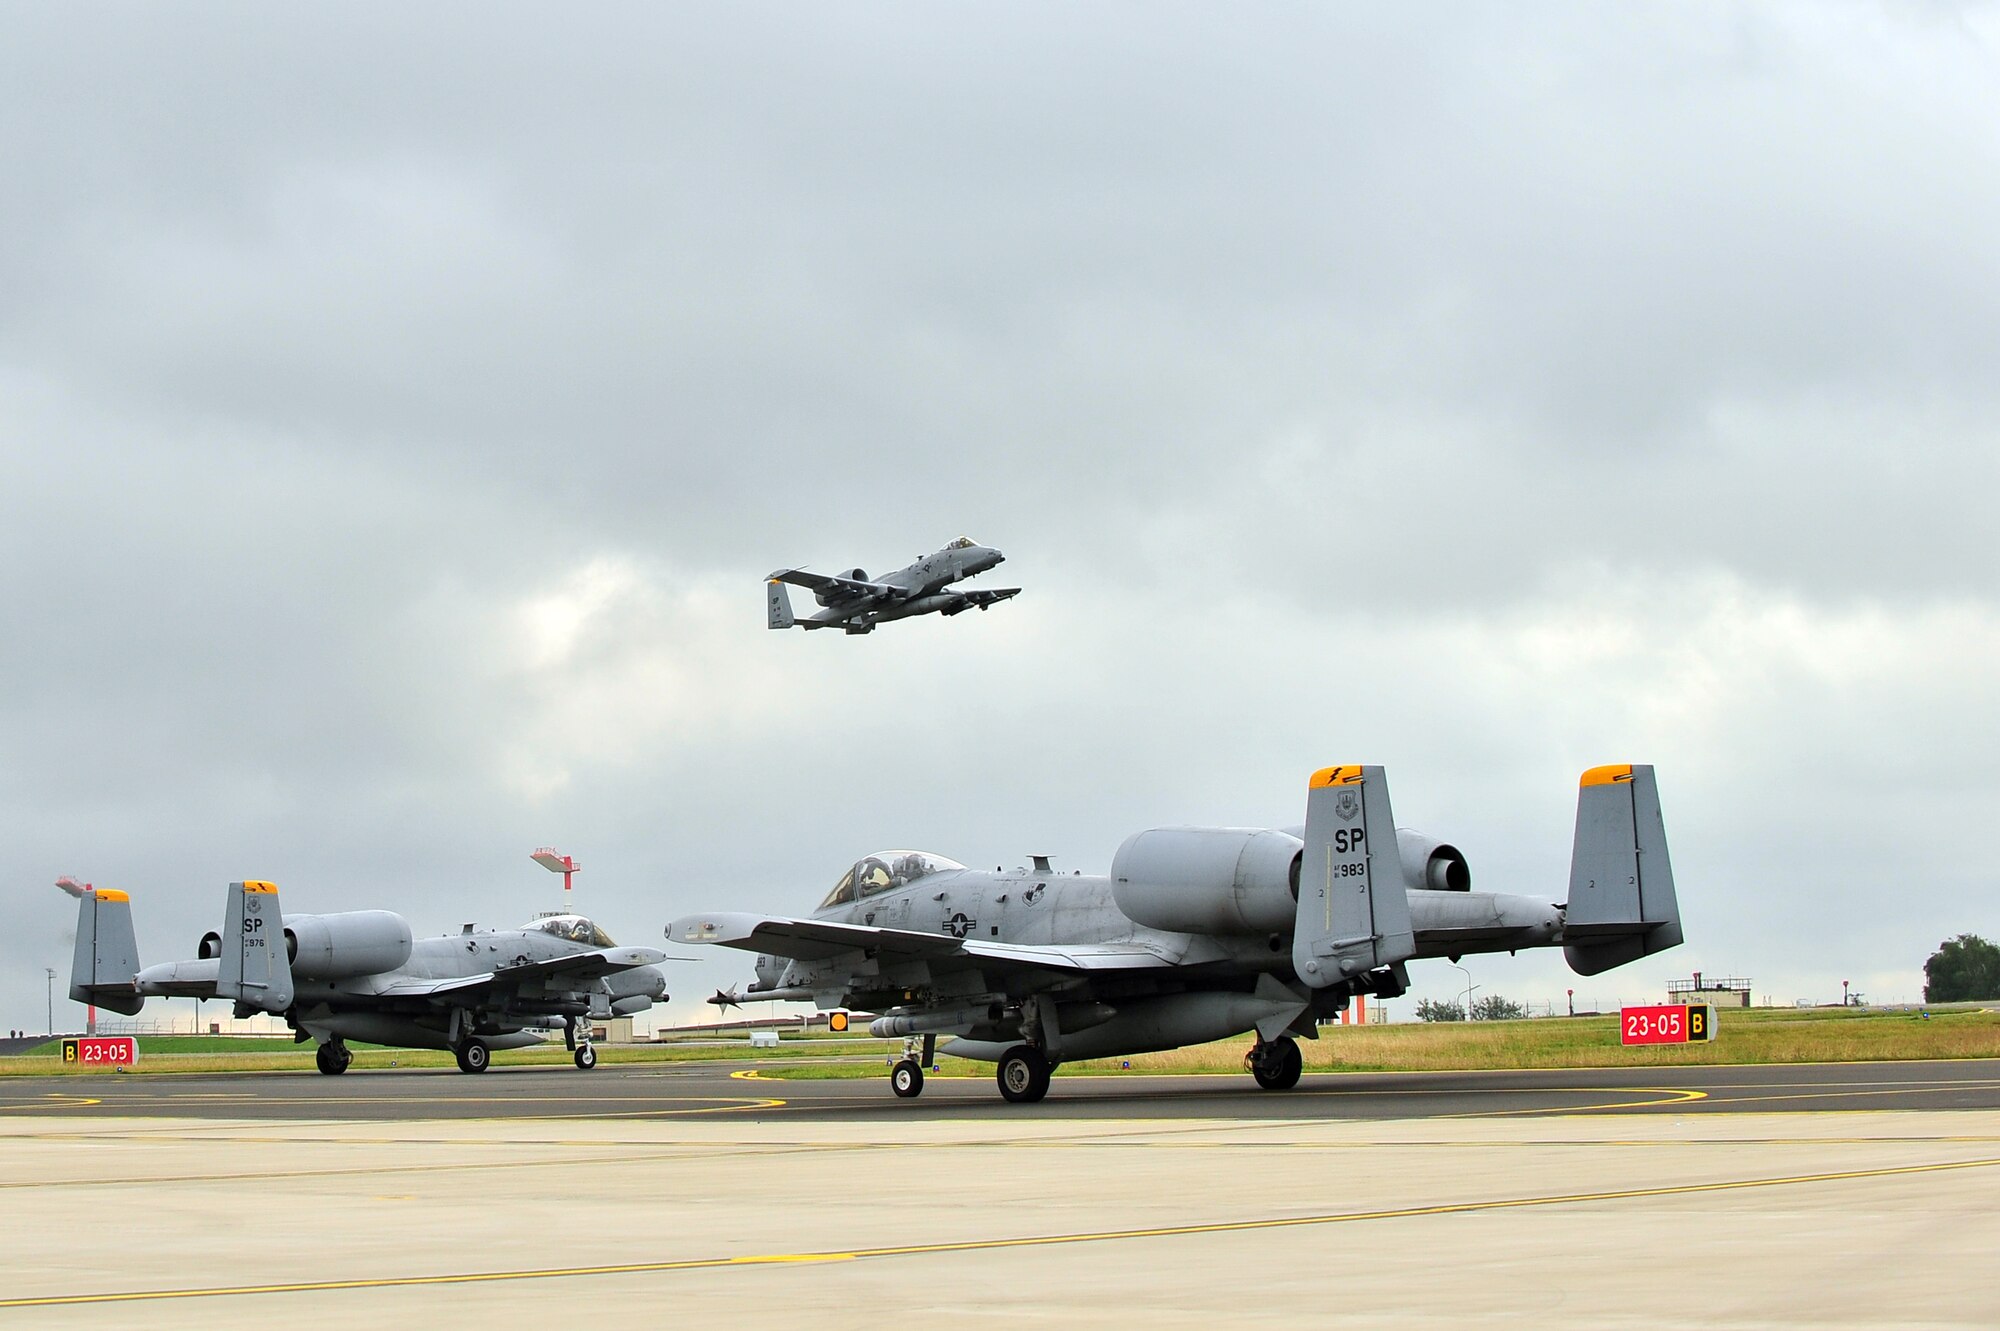 037
SPANGDAHLEM AIR BASE, Germany – Two A-10 Thunderbolt II aircraft from the 81st Fighter Squadron taxi onto the flightline as another A-10 takes off for Exercise Dacian Thunder July 6. The 81st FS, along with members of the Romanian air force, are working together during the exercise to practice close-air-support and combat search and rescue techniques to build partnerships while mutually improving their capabilities. (U.S. Air Force photo by Airman 1st Class Dillon Davis/Released)